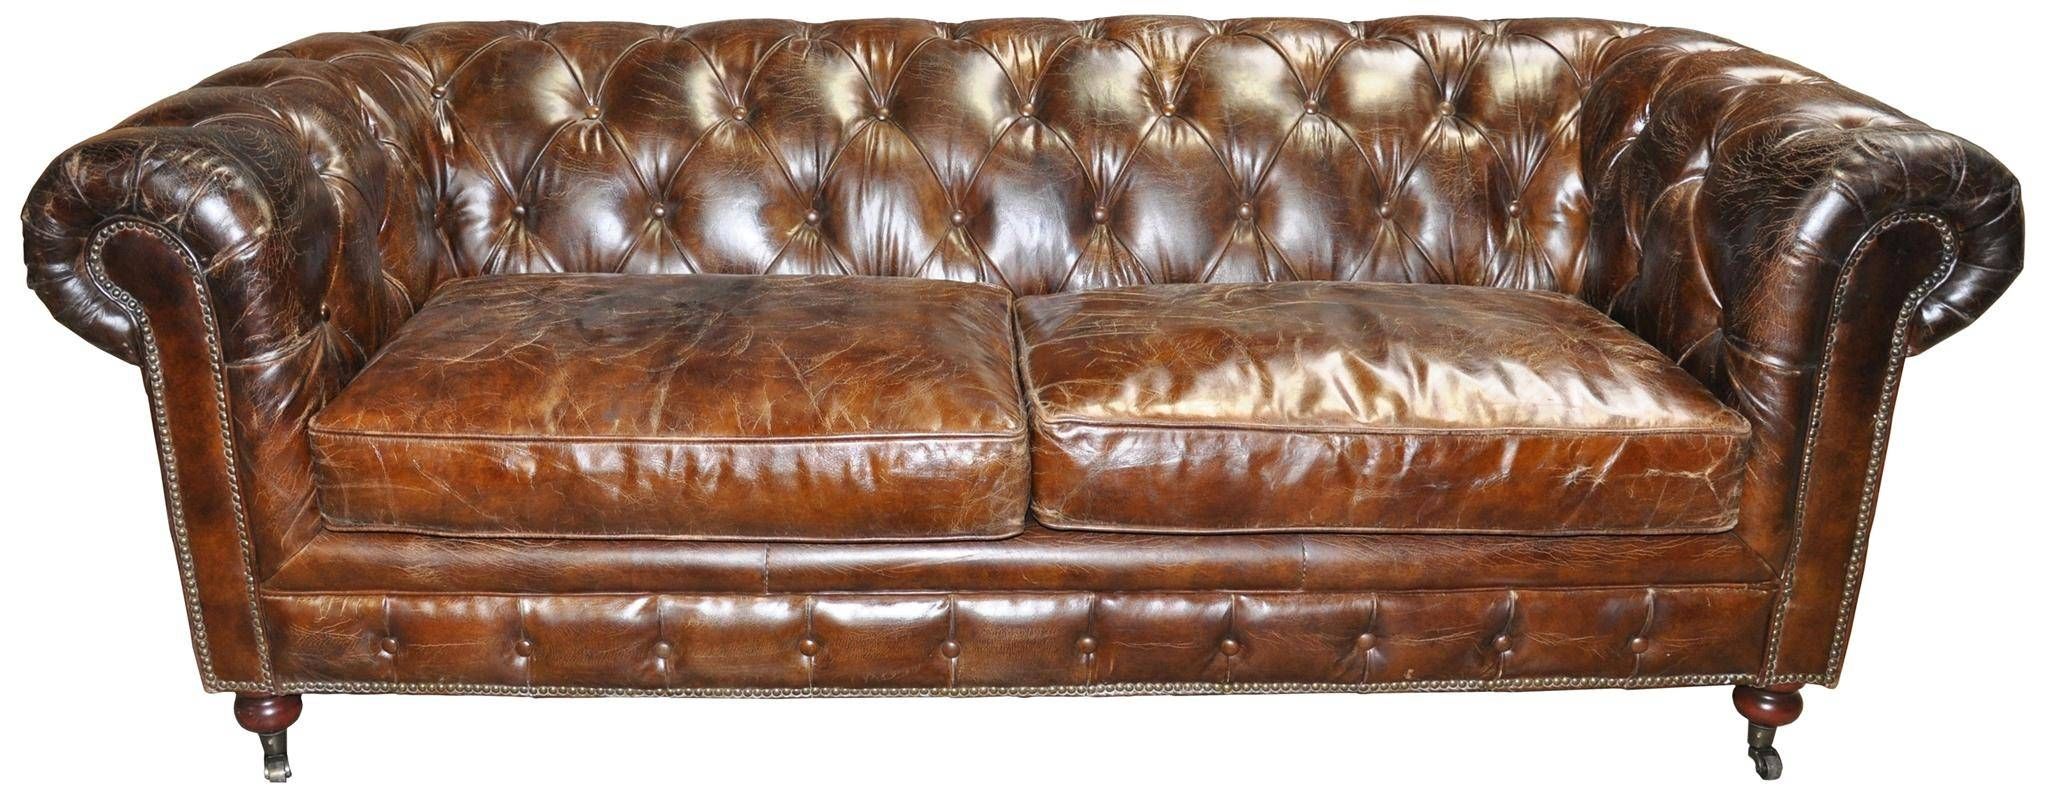 Trendy Vintage Leatyou Sofa Toronto On Vintage Lea 999x1000 Intended For Vintage Leather Sectional Sofas (View 18 of 30)